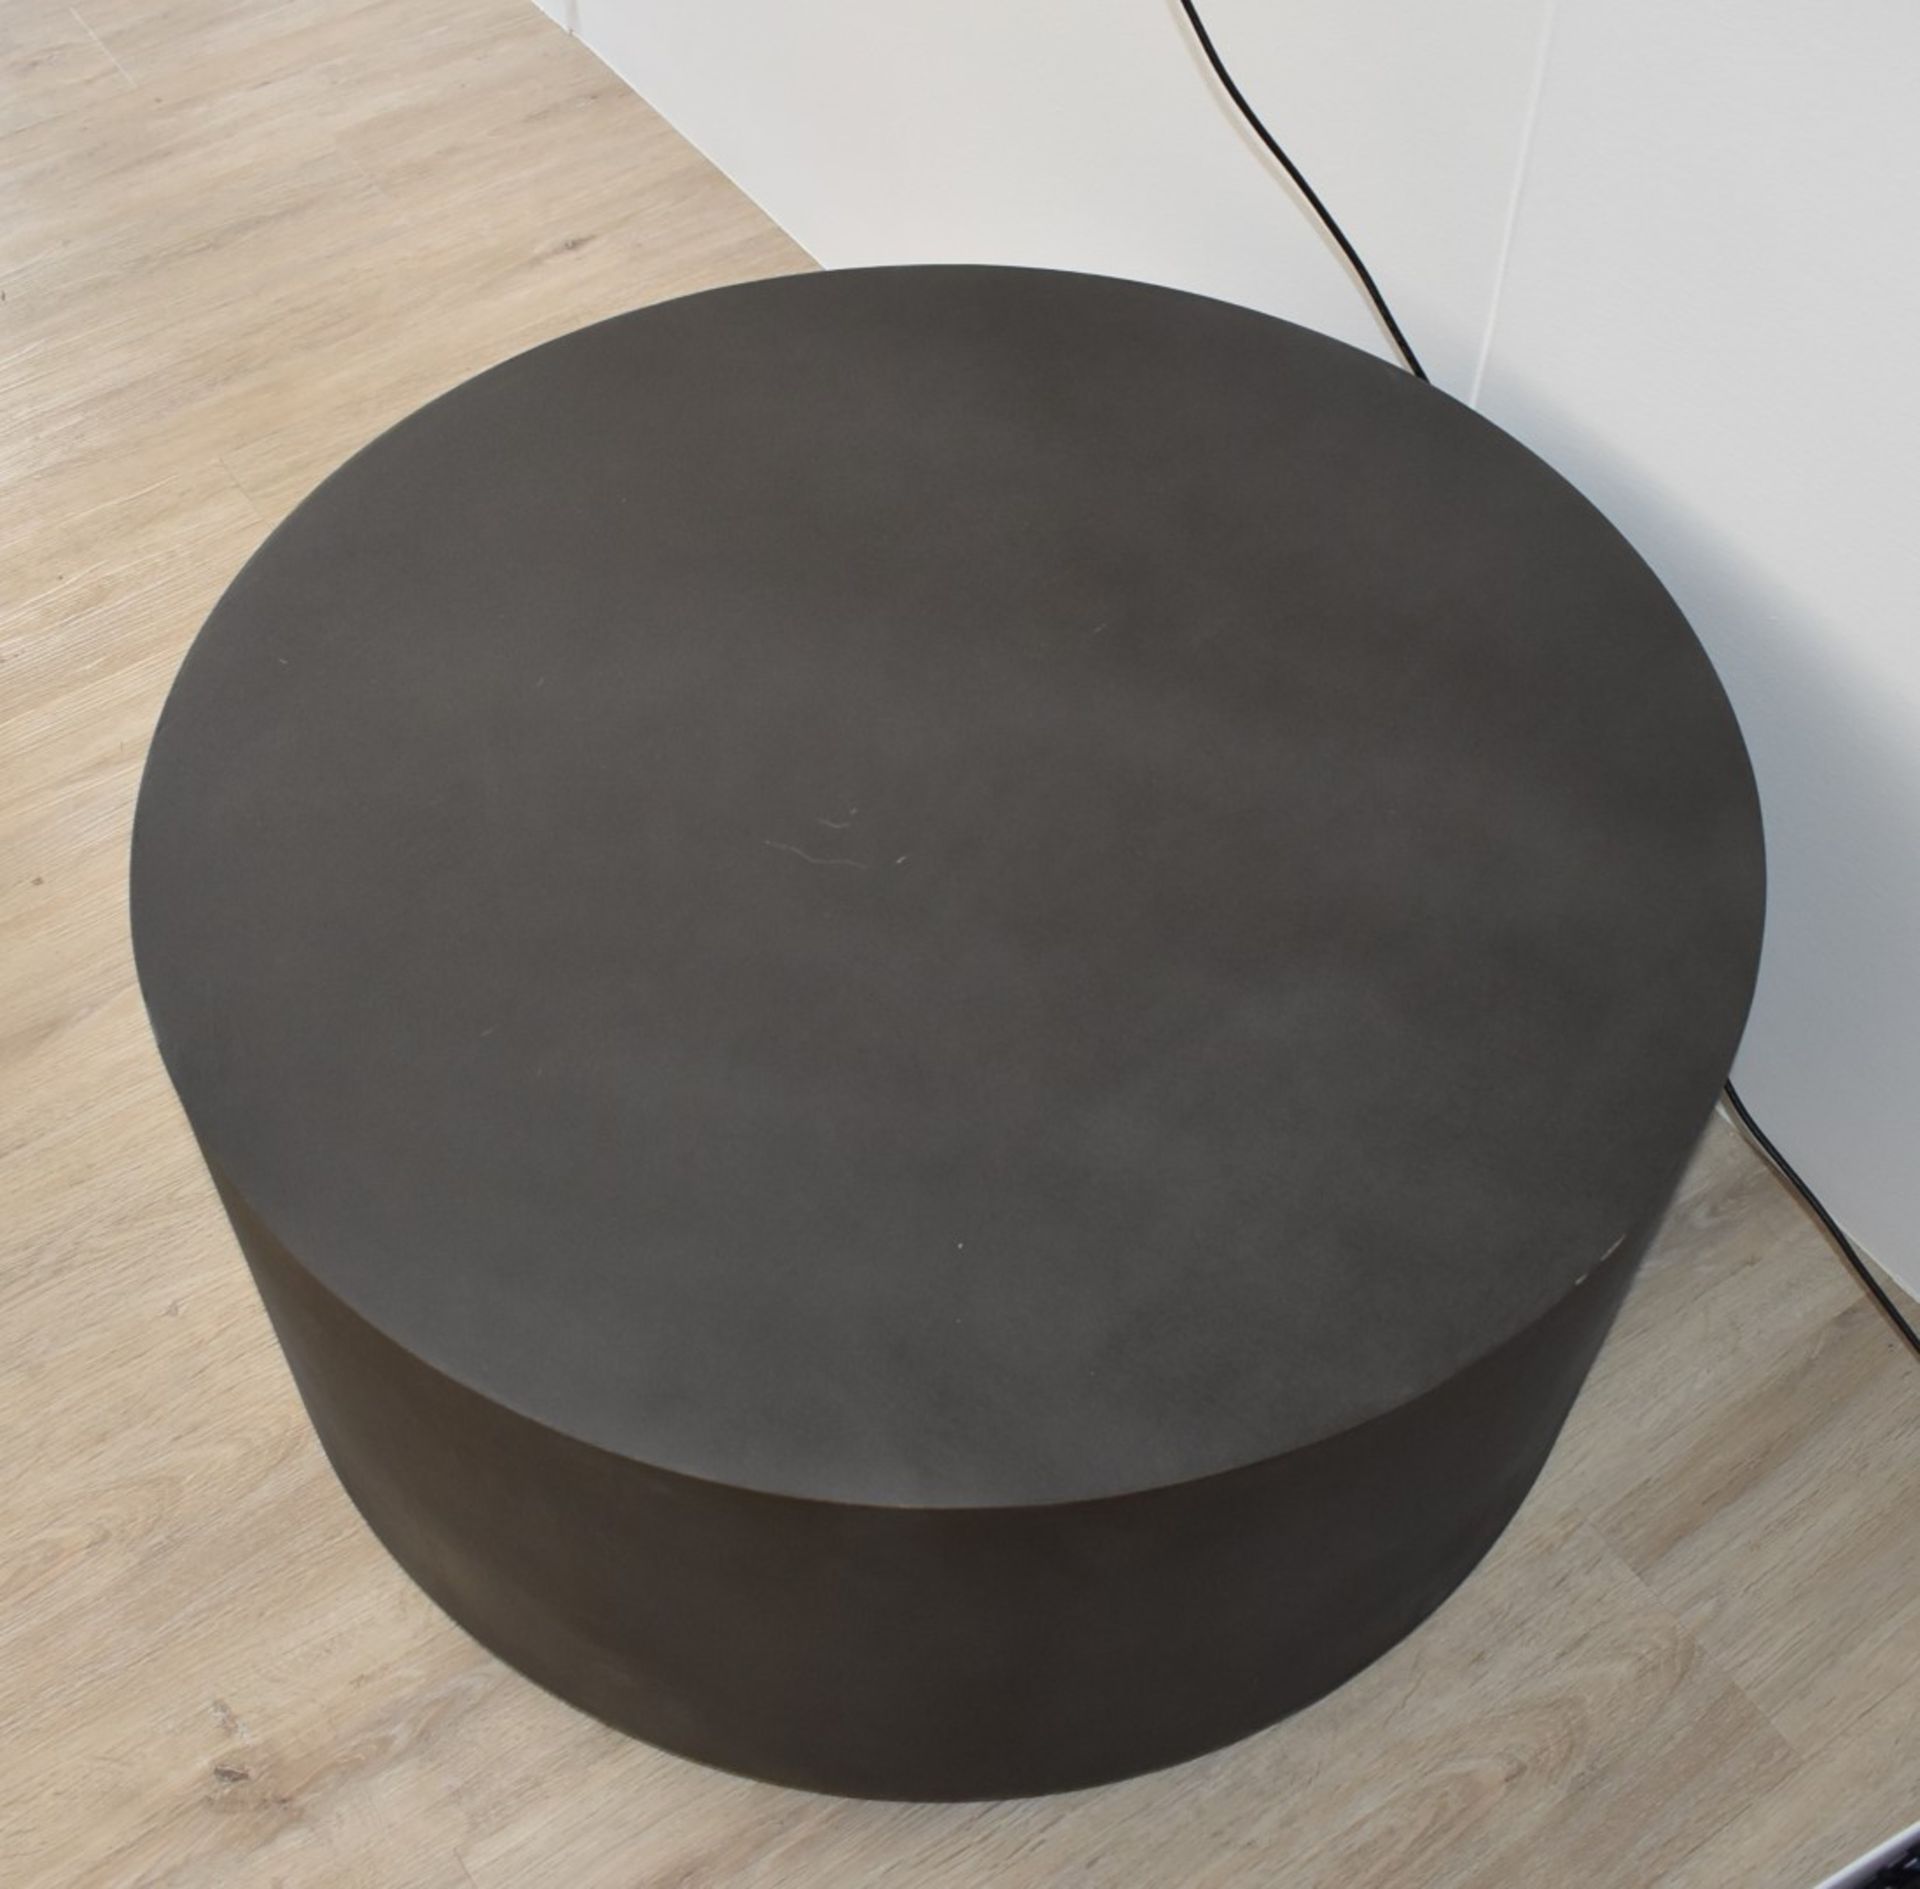 1 x Round Coffee Table With Concrete Effect Finish and Gold Base - RRP £455 - NO VAT ON THE HAMMER! - Image 4 of 7